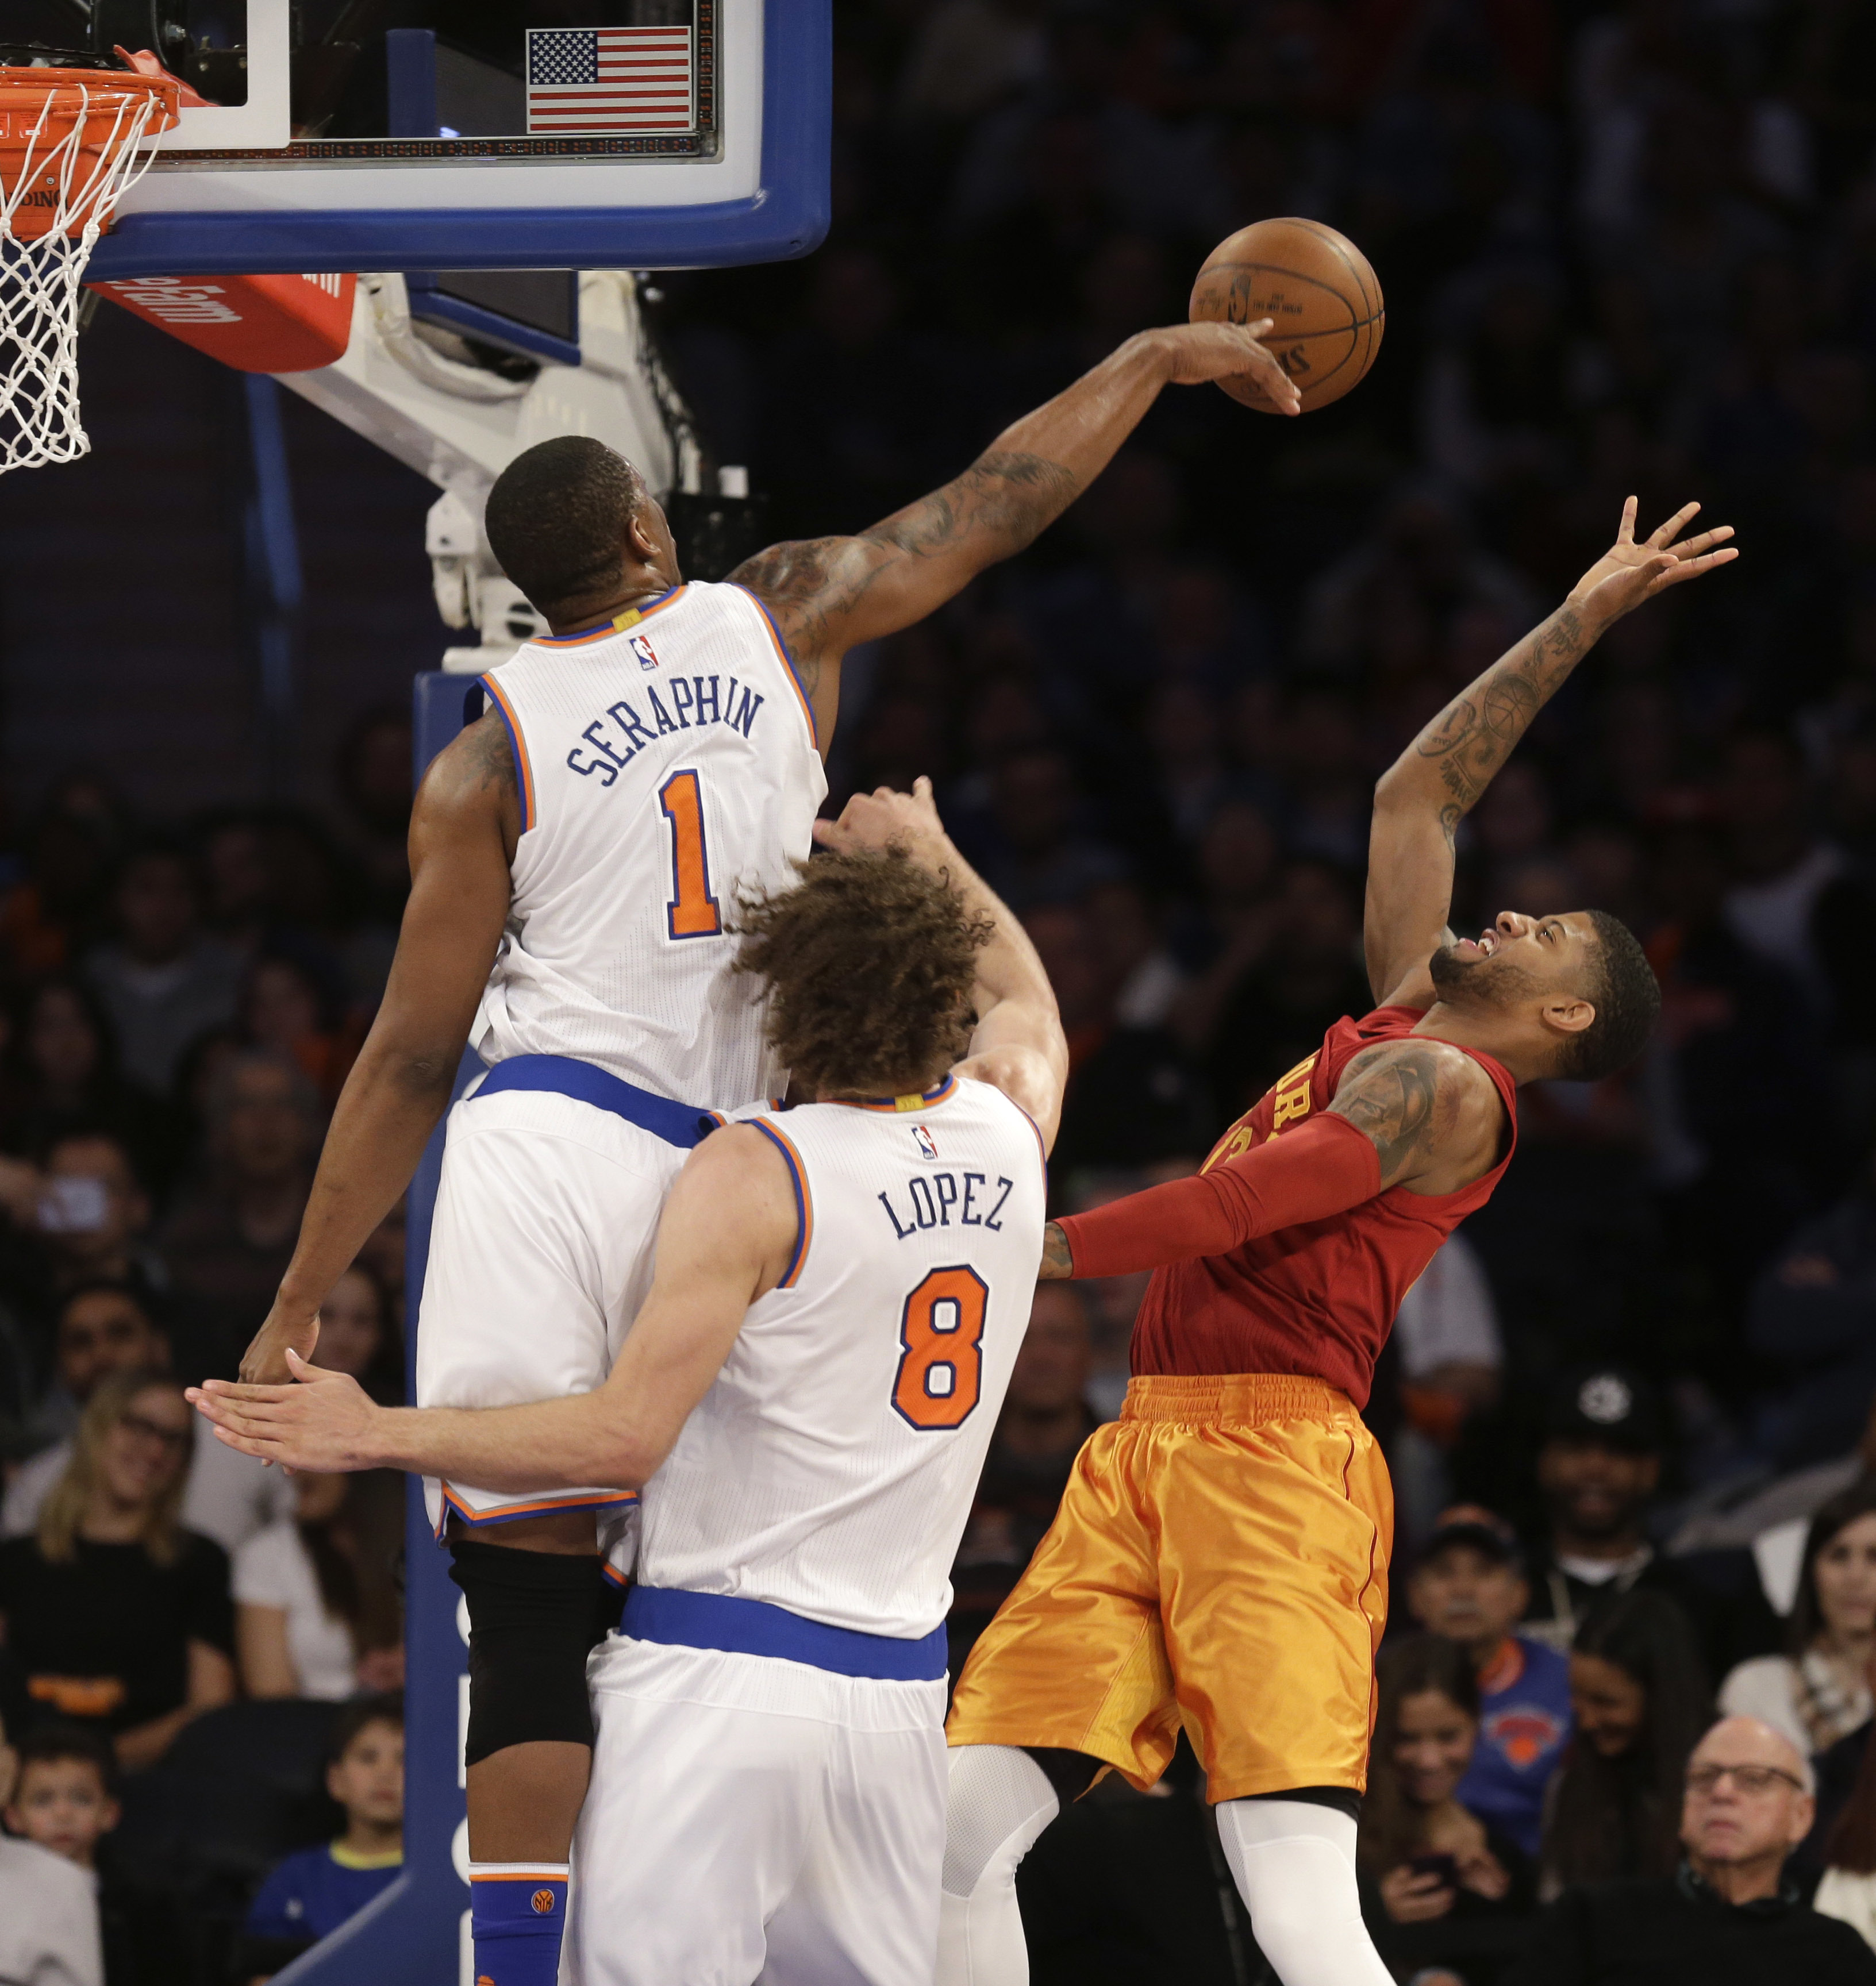 George hits go-ahead shot, Pacers edge Knicks to tie for 7th